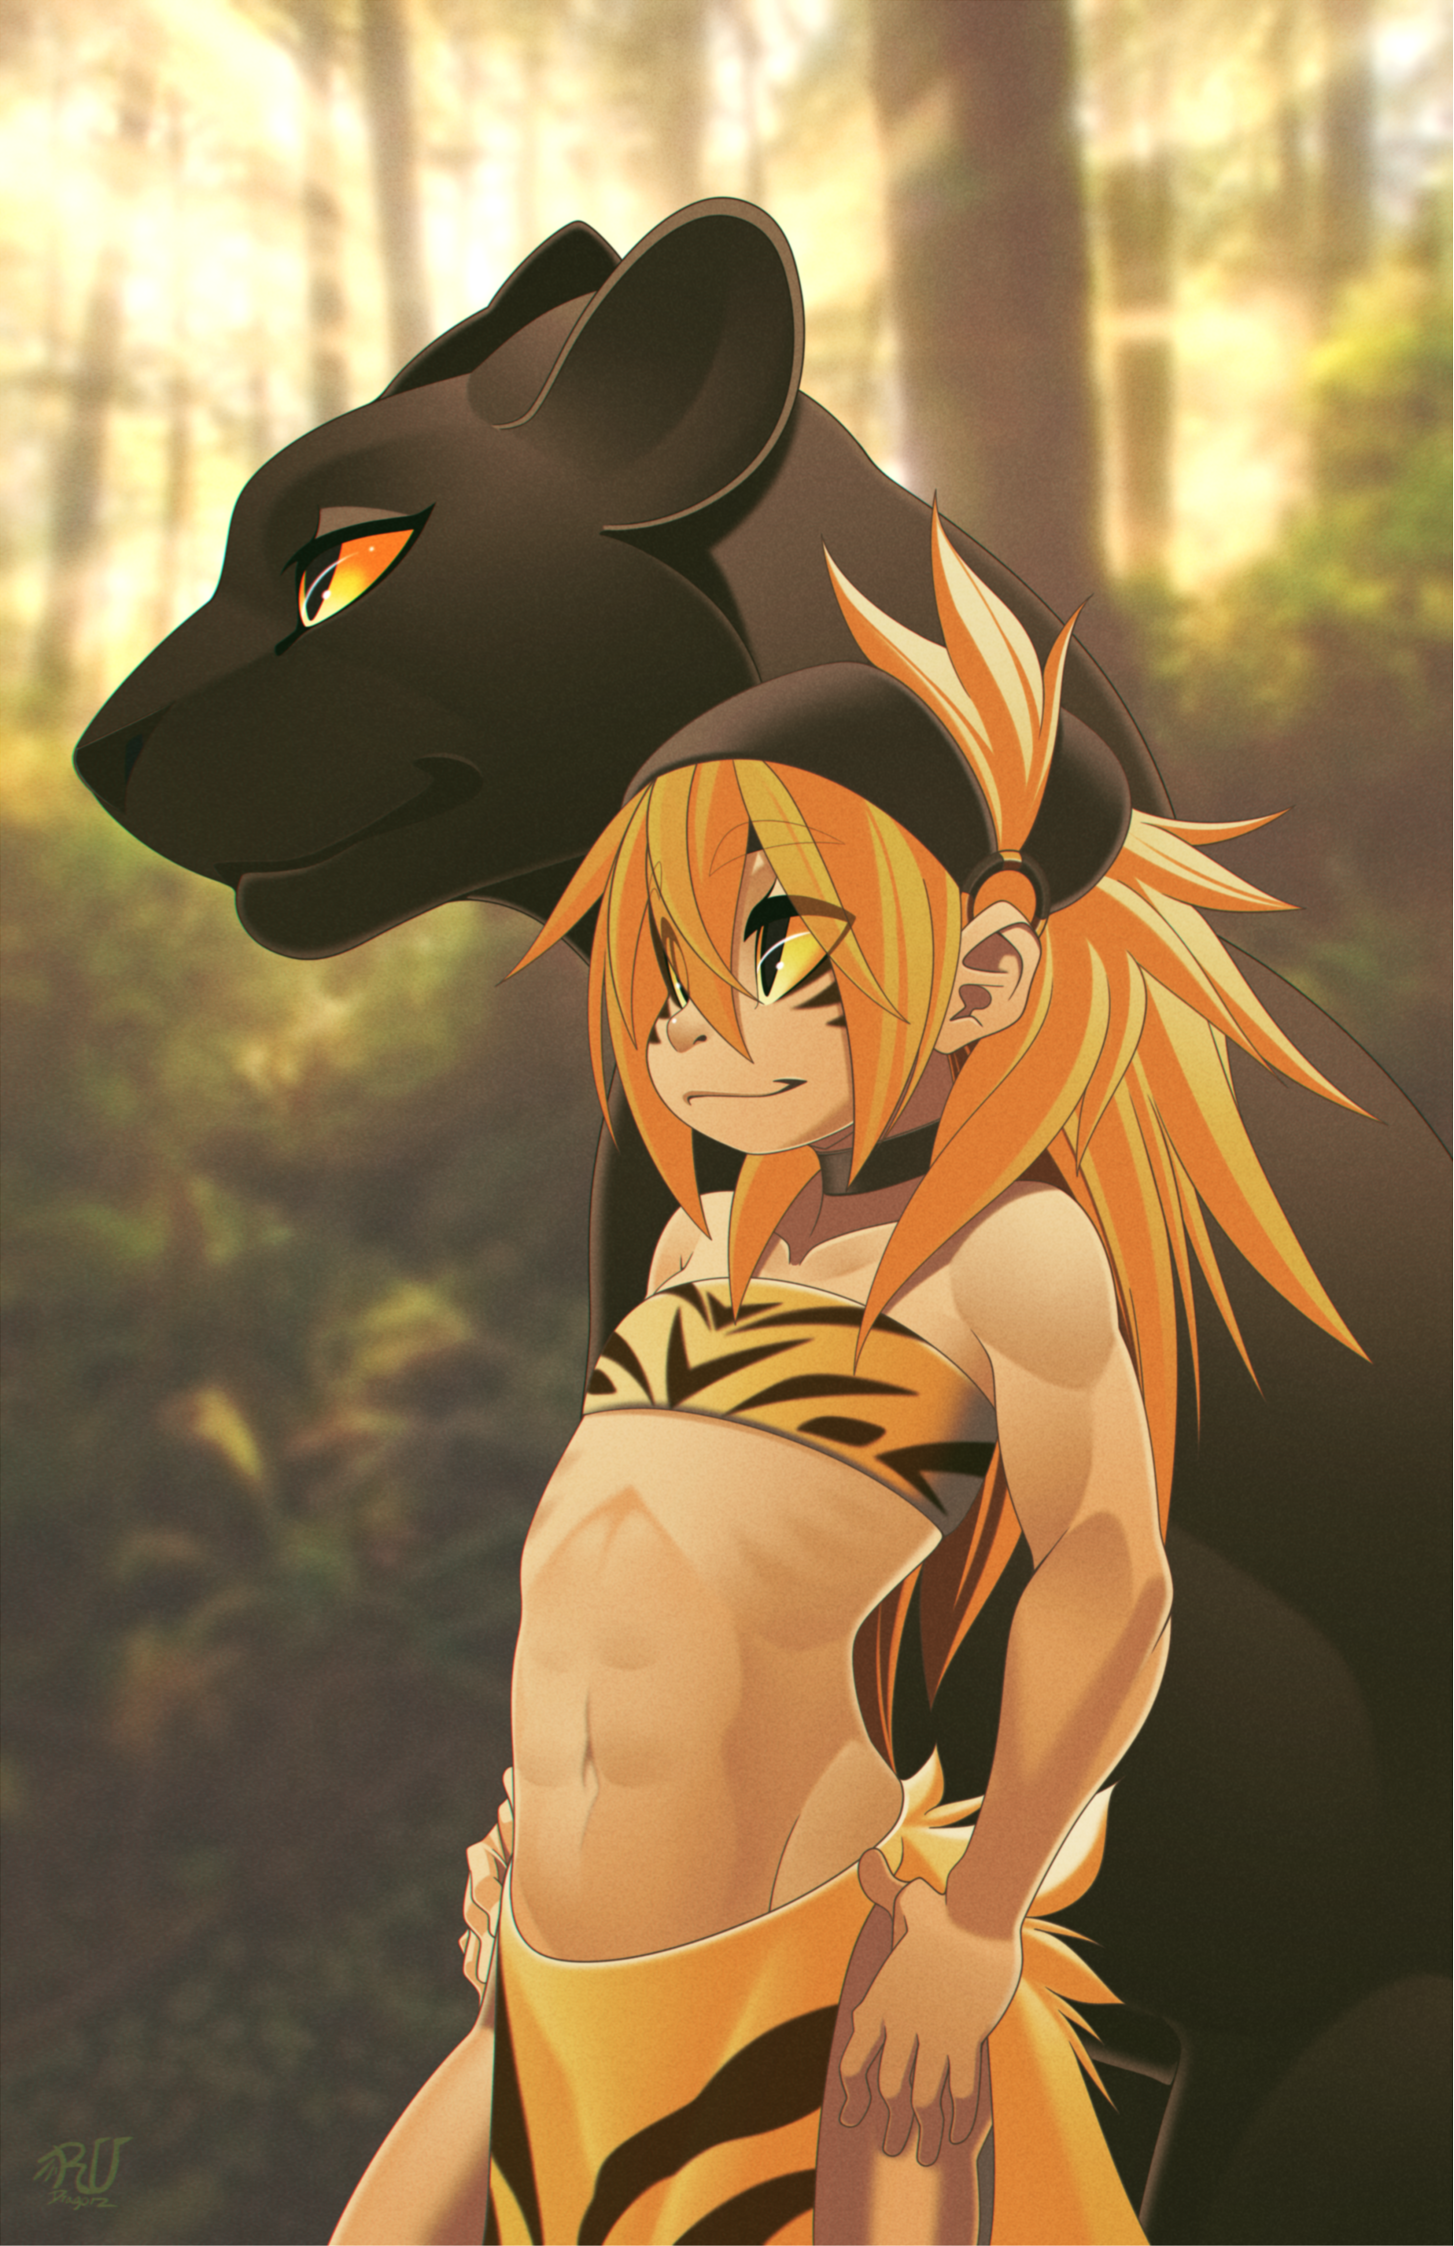 1134 X 705 1 - Girl And Panther Anime Transparent PNG - 1134x705 - Free  Download on NicePNG